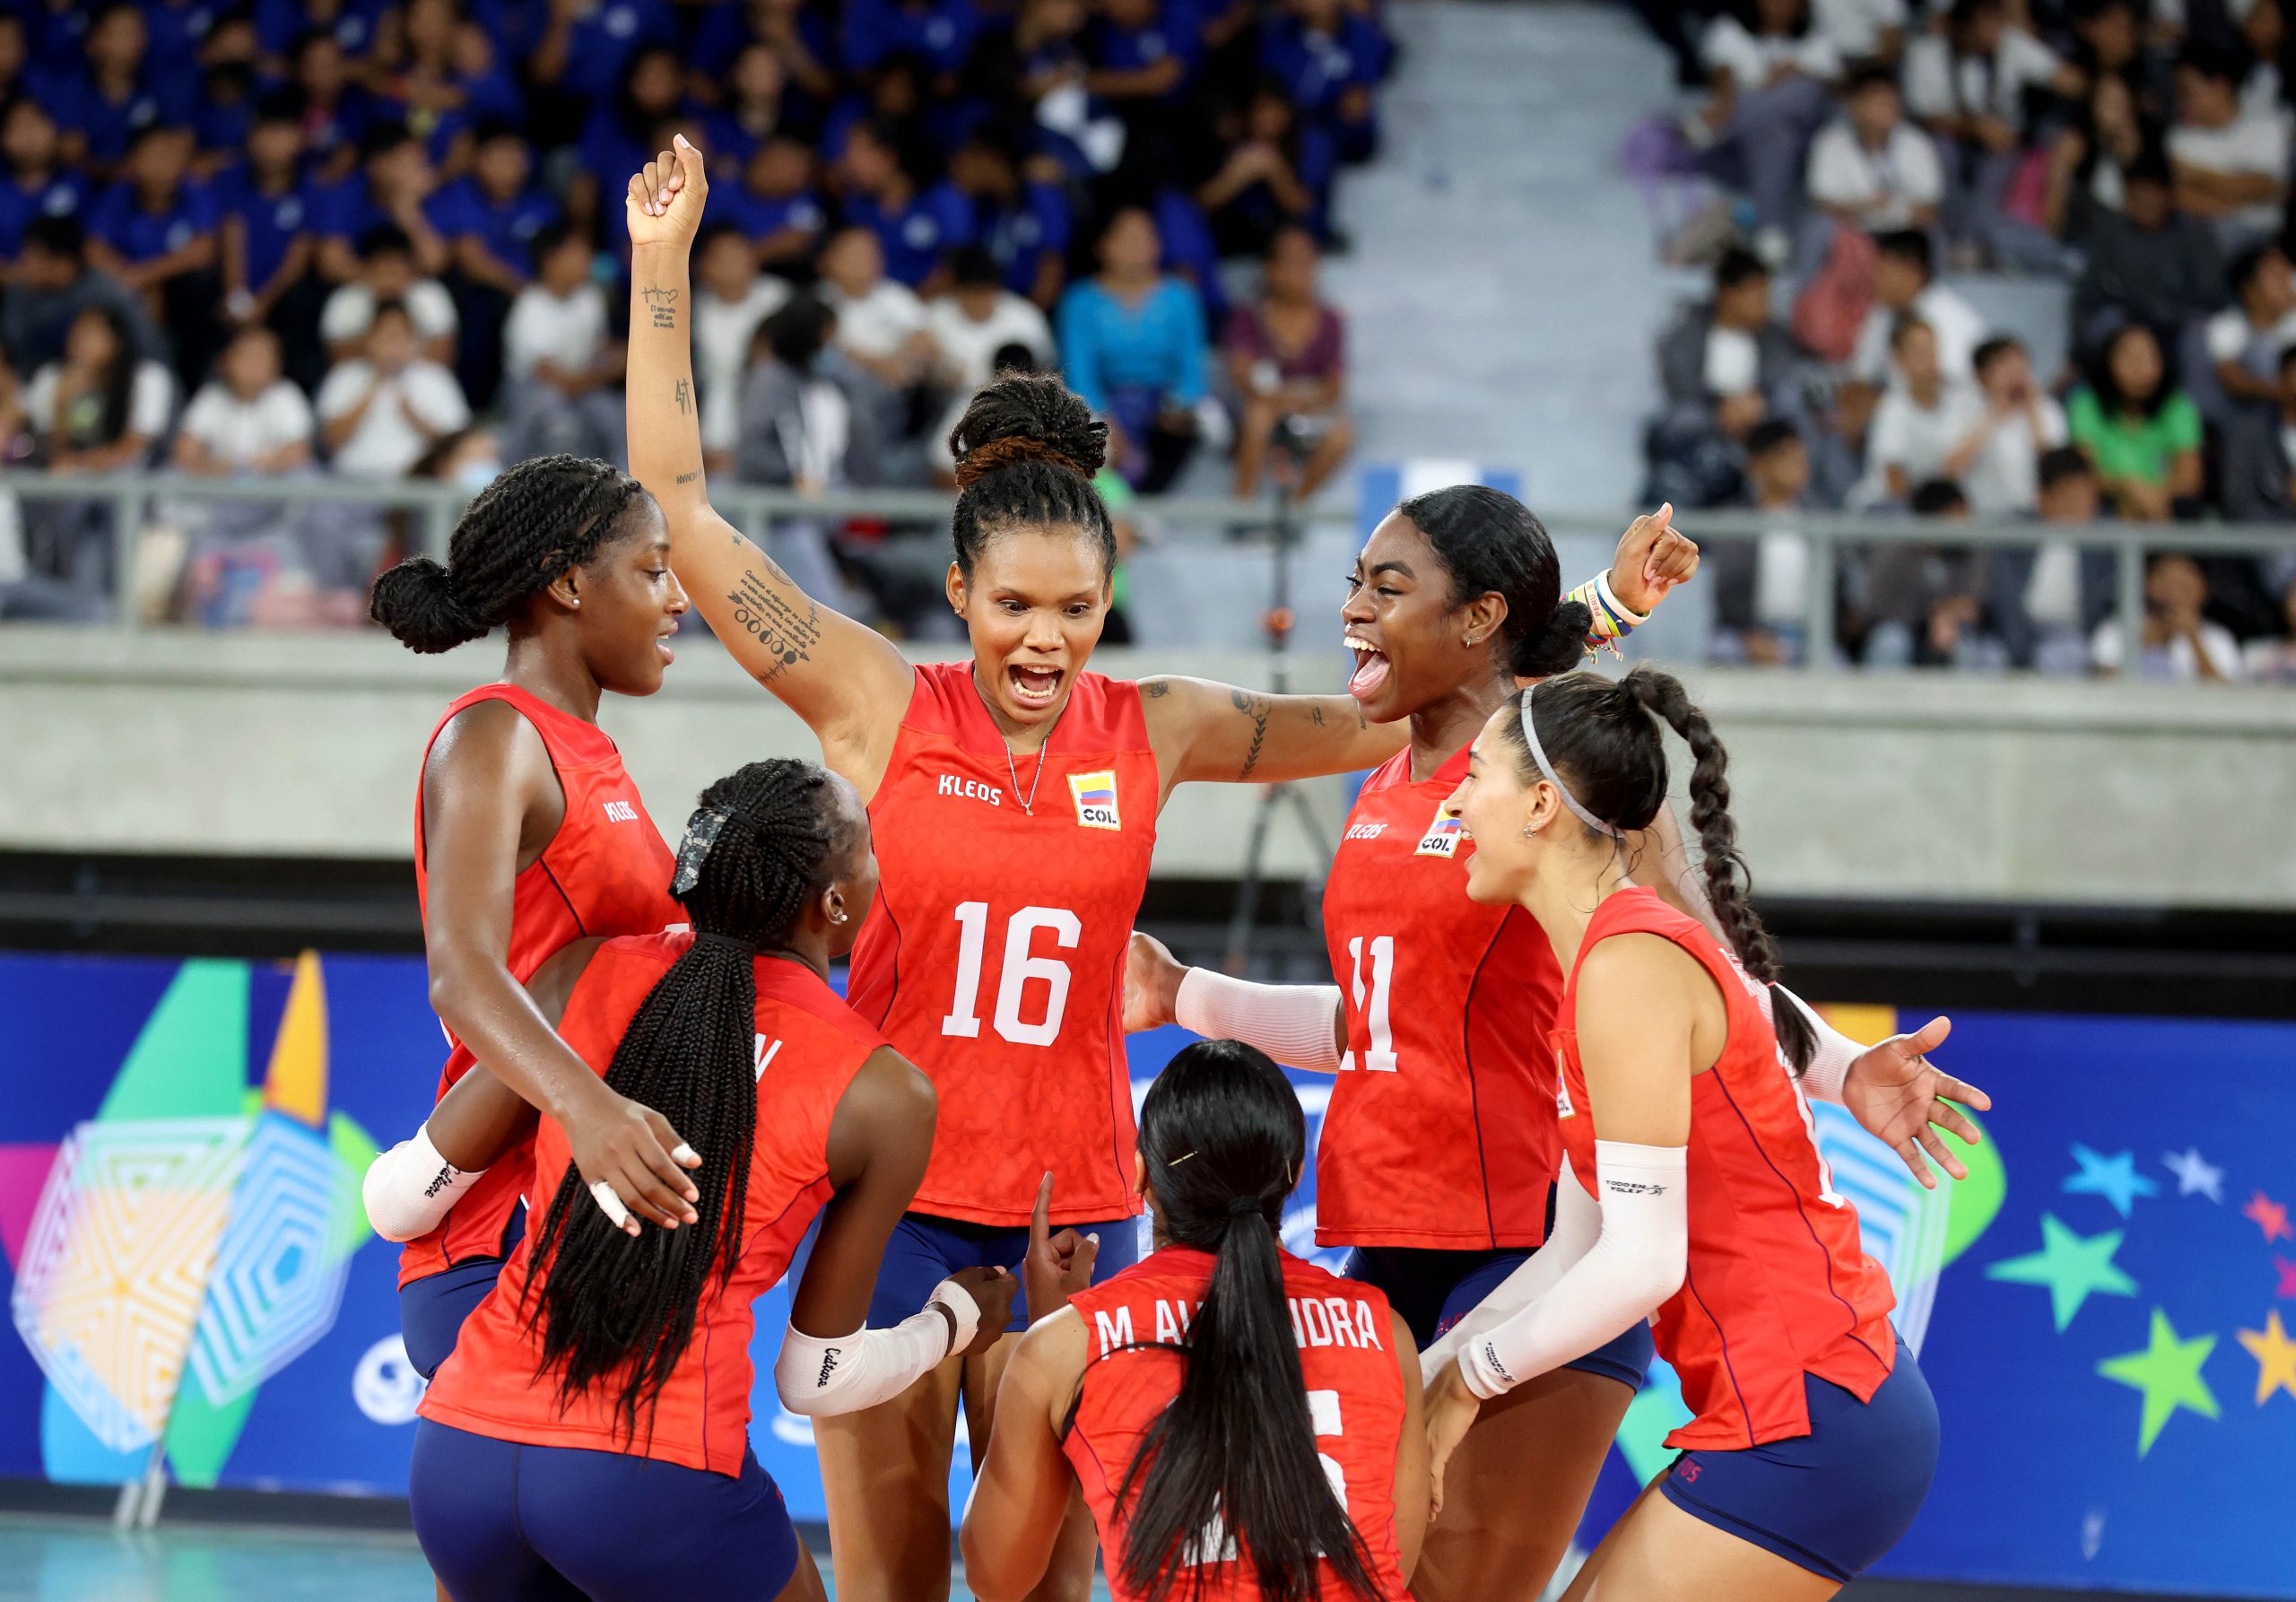 Second win in a row for Colombia in Pool B